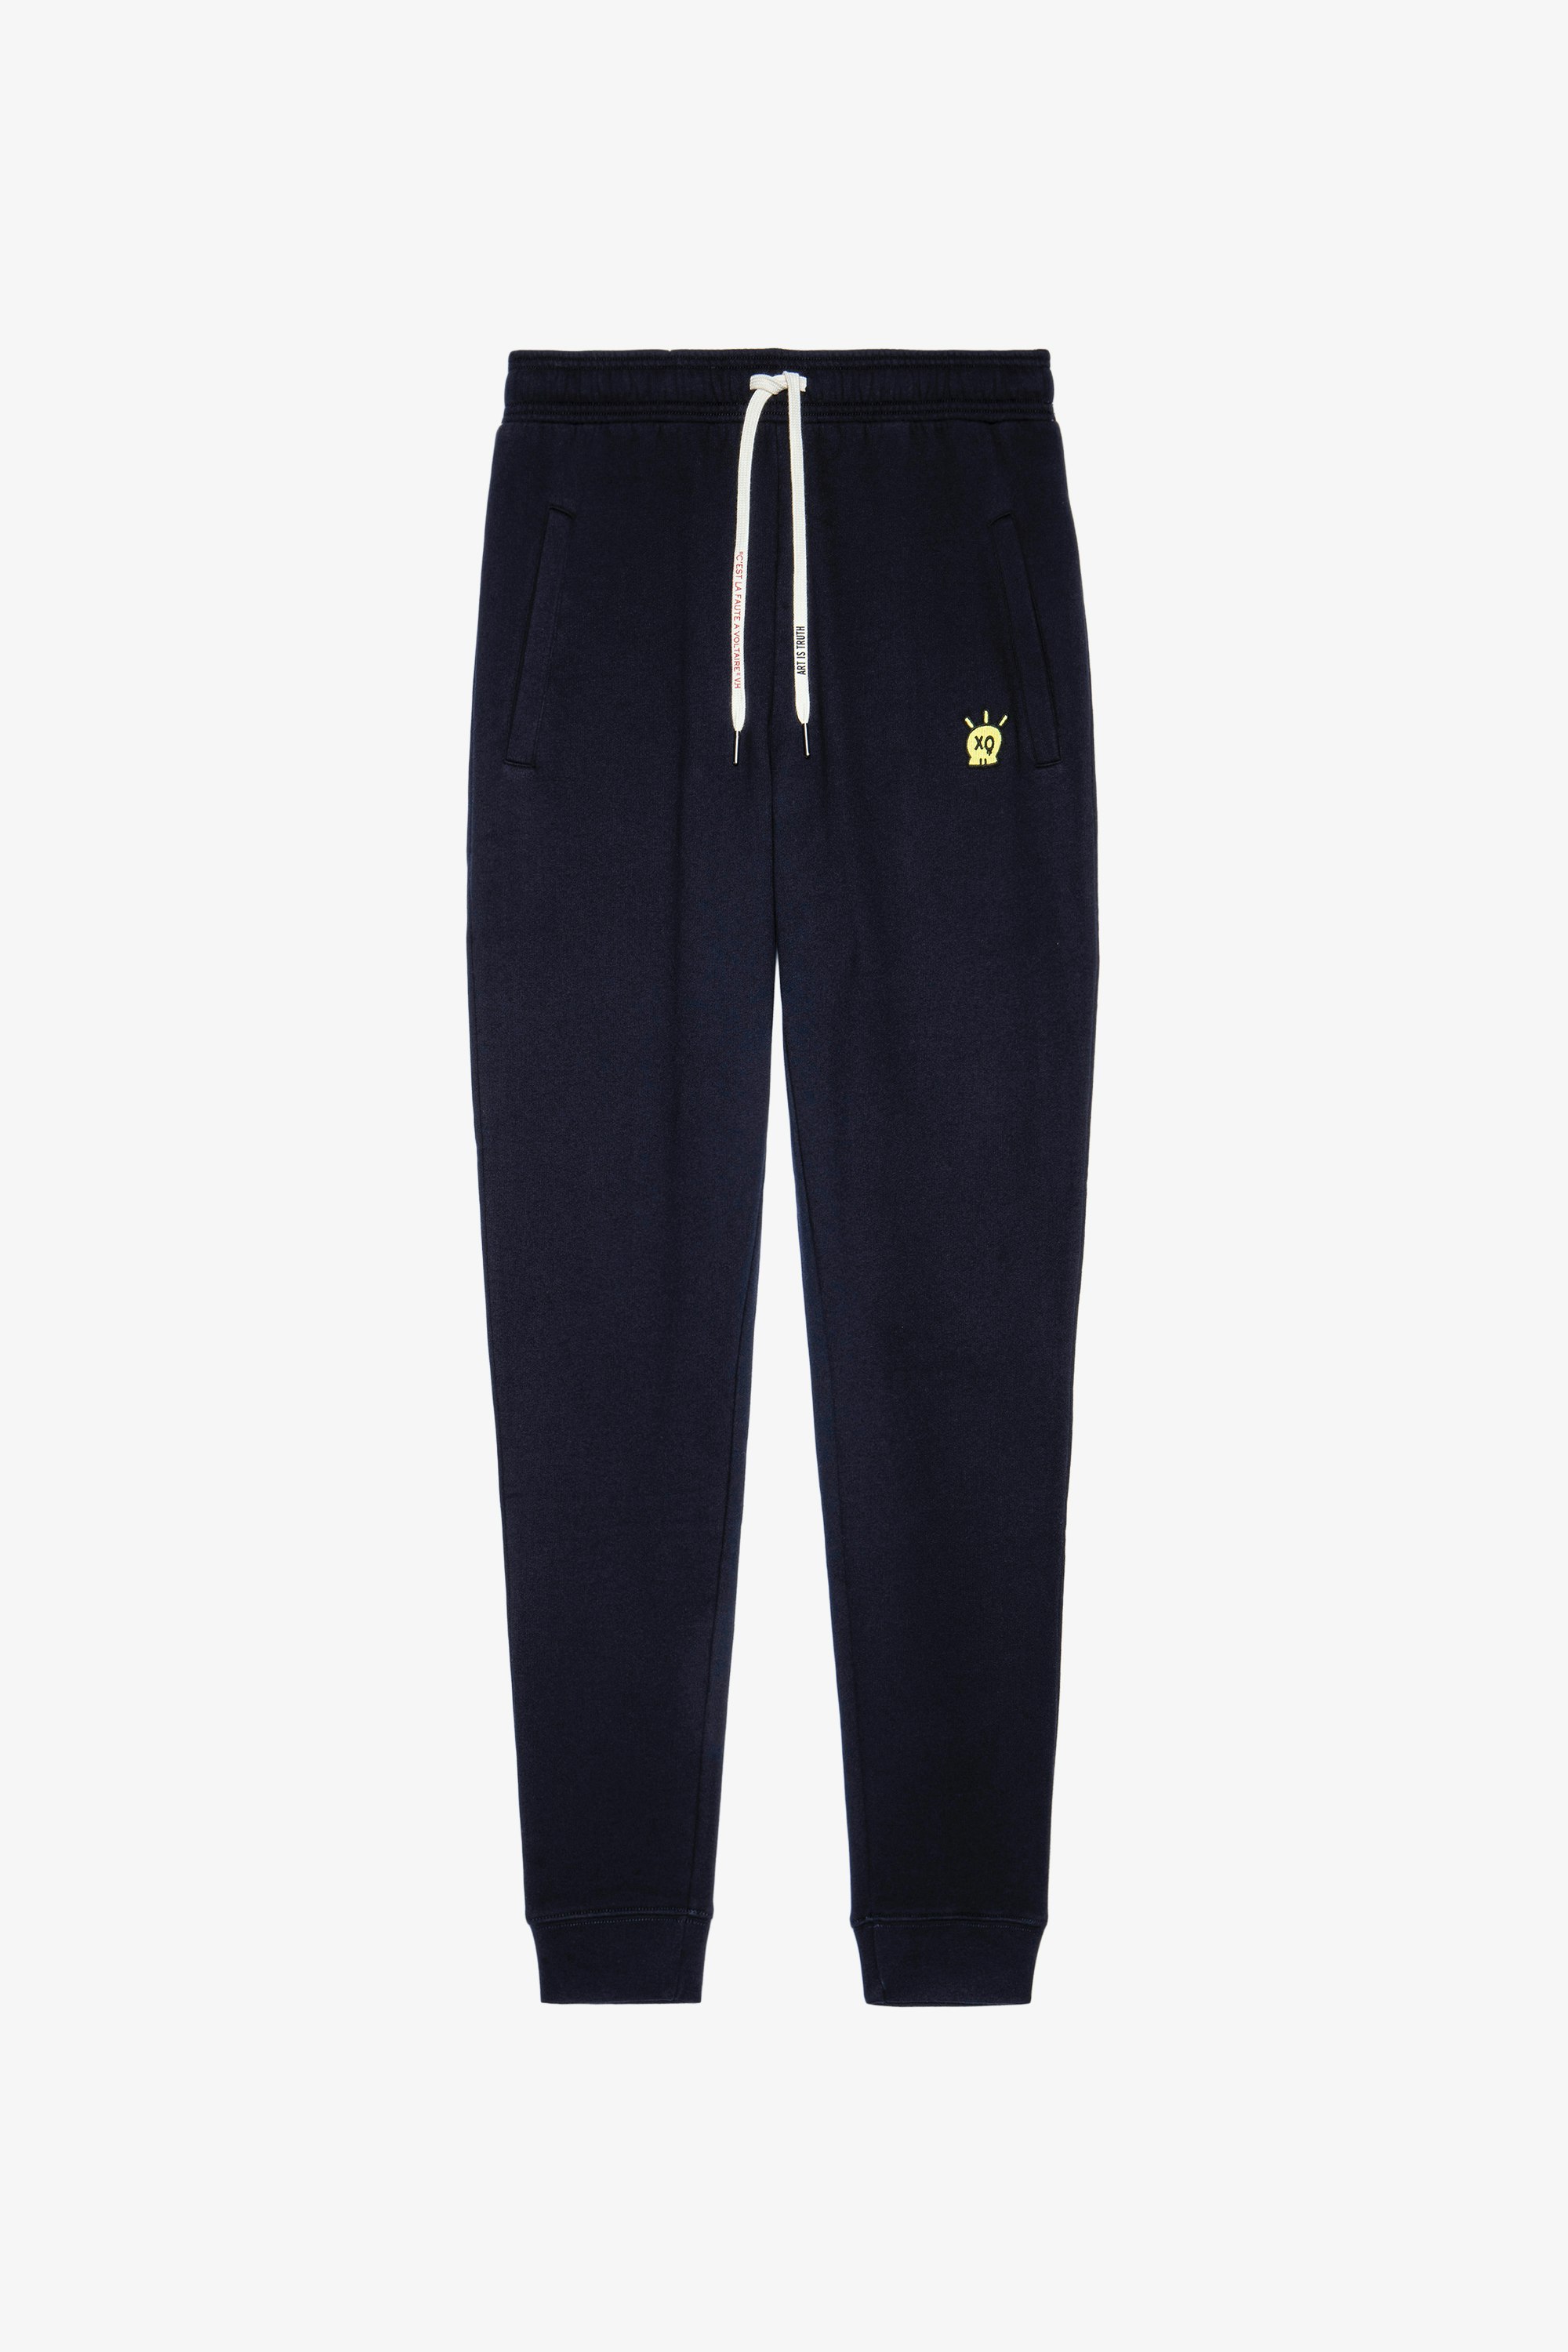 Capri Skull パンツ Men's fleece tracksuit bottoms in ink colour with skull patch. This product is GOTS certified and made with fibers from organic farming.